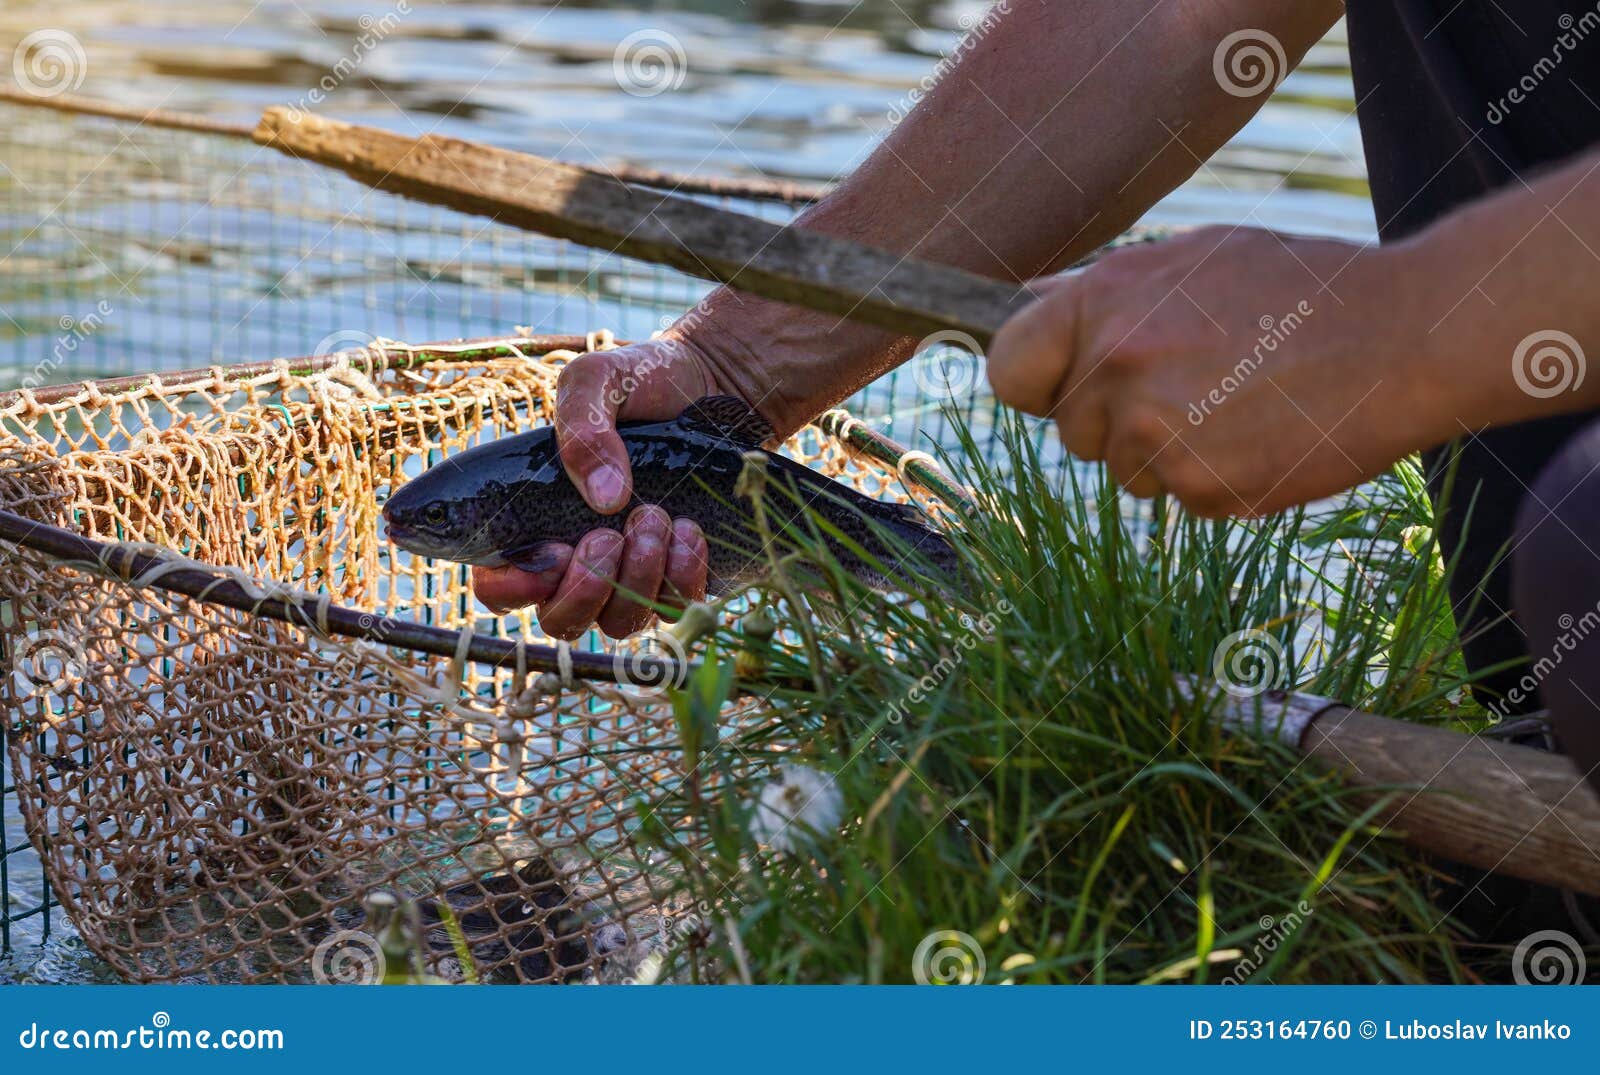 Fishing Scoop Net with Freshly Caught Rainbow Trout Fishes, Hand